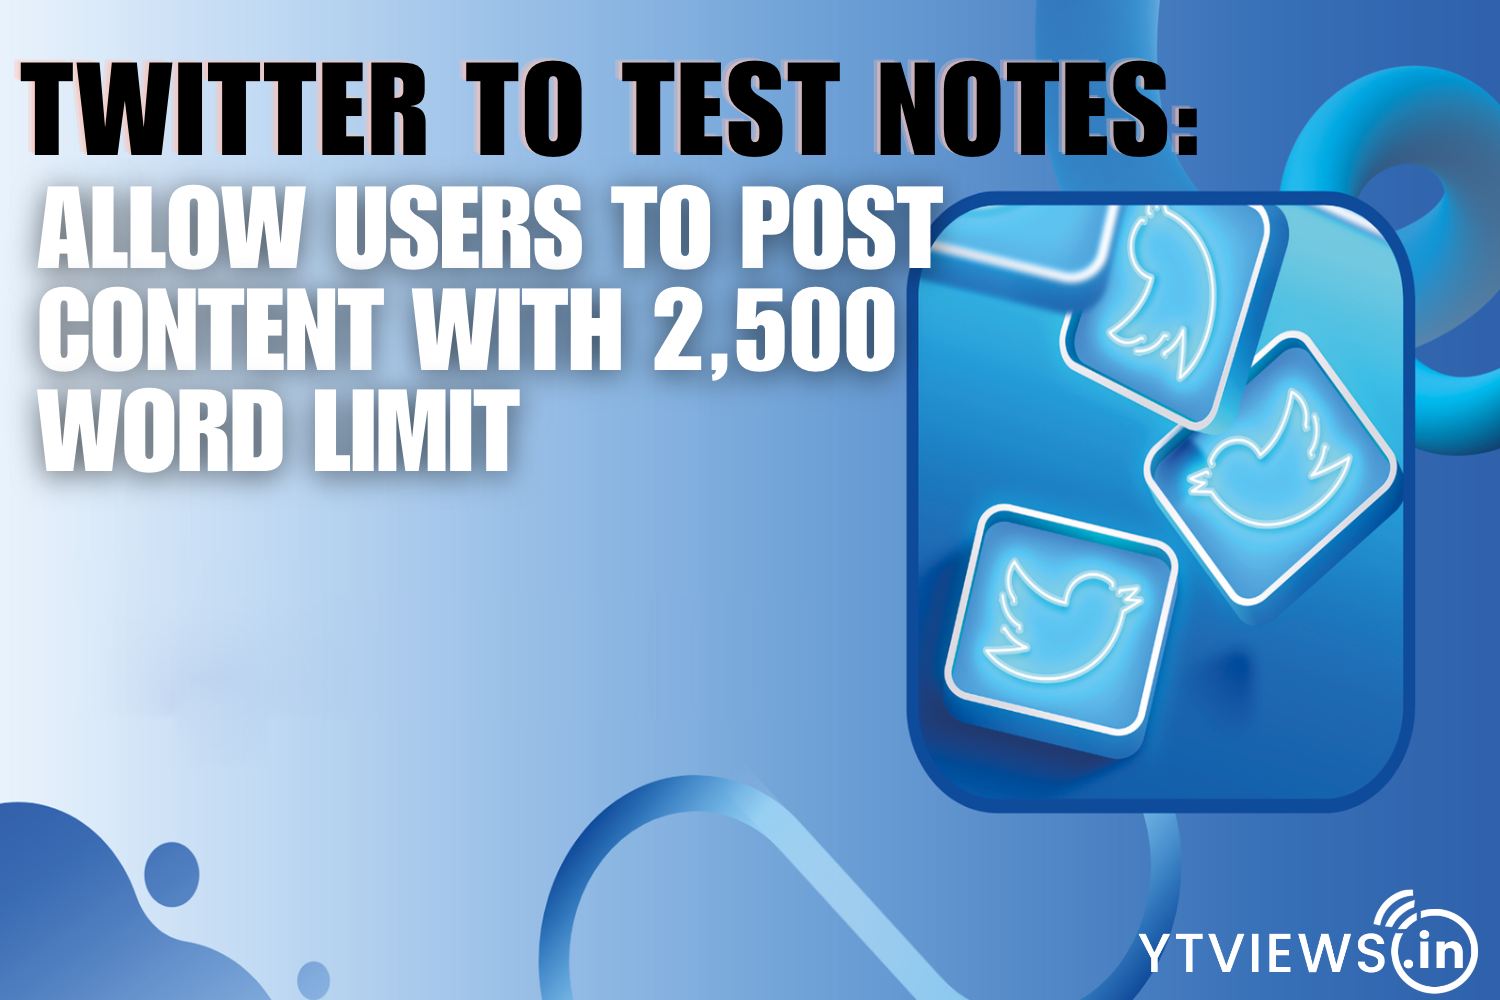 Twitter/X To Test Notes: Allows Users To Post Content with 2,500 word limit